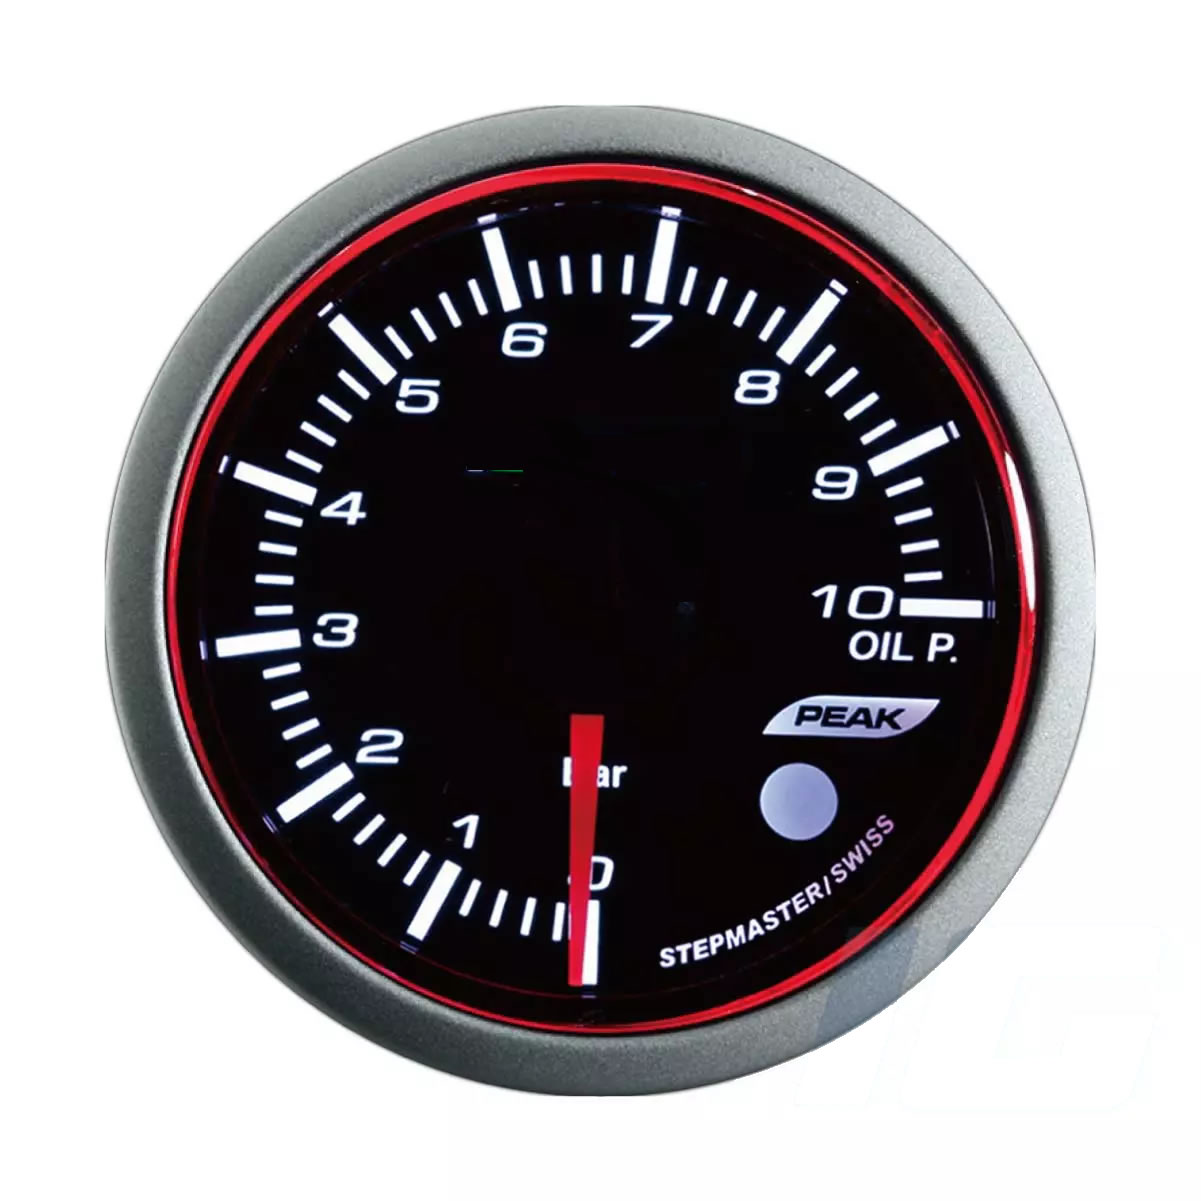 52mm White and Blue and Amber LED Performance Car Gauges - Oil Pressure Gauge With Sensor and Warning and Peak For Your Sport Racing Car